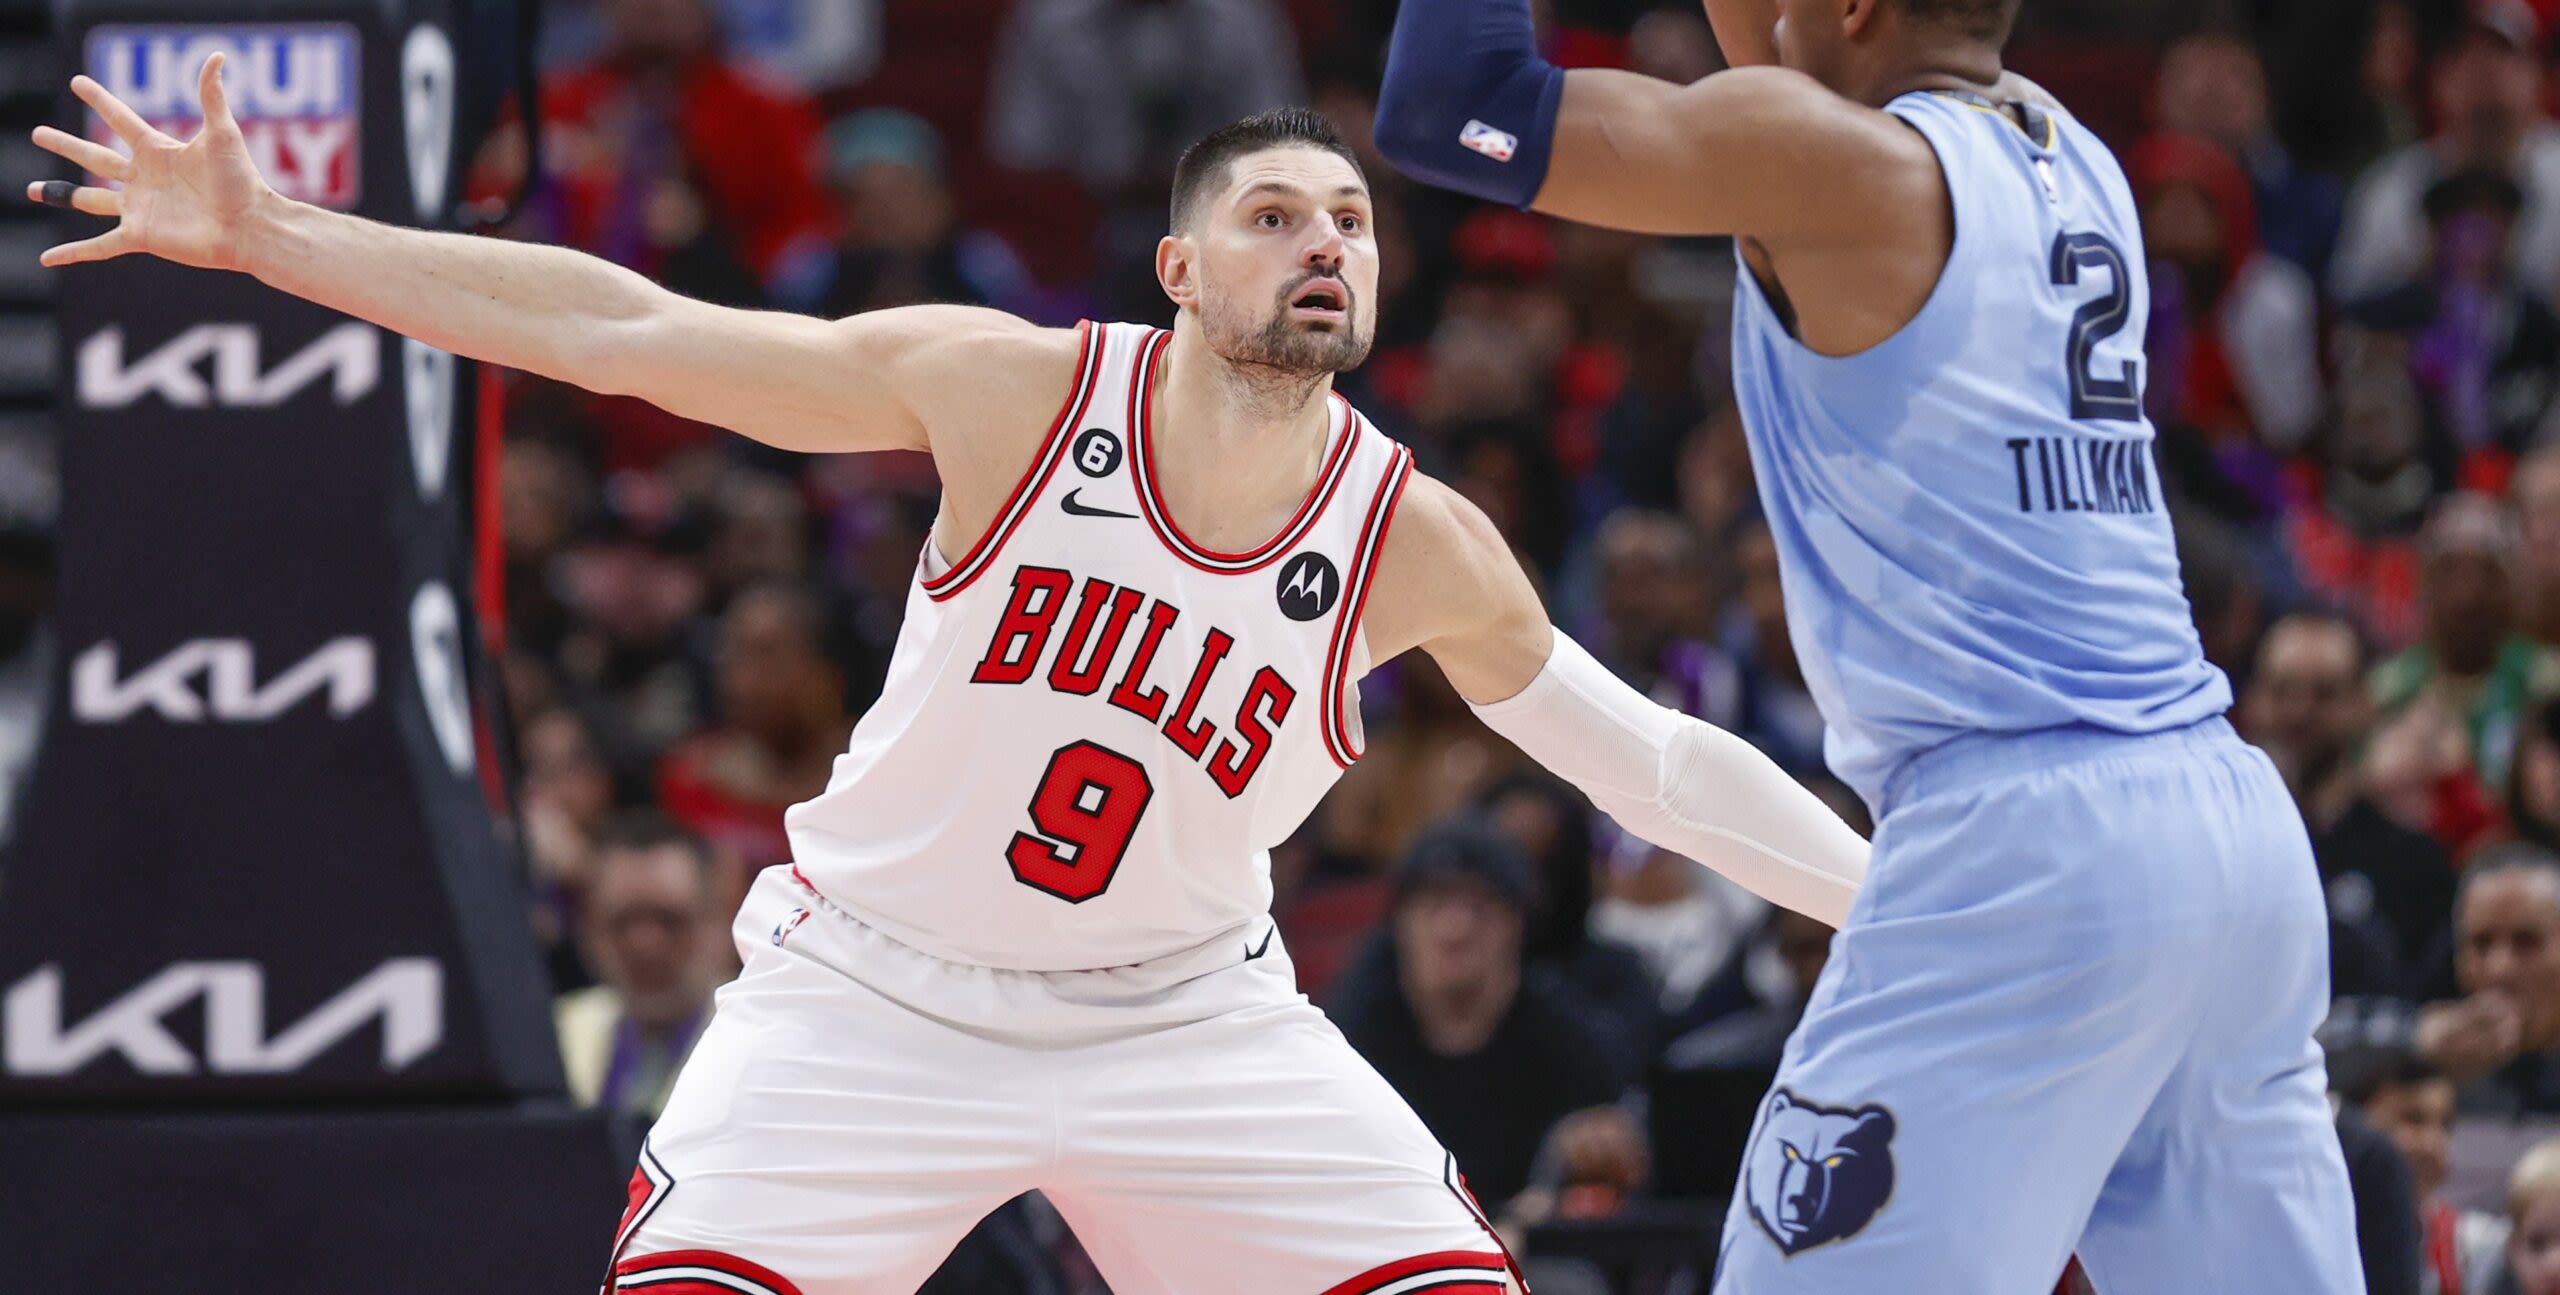 Could we see Nikola Vucevic traded to the Memphis Grizzlies, or Brandom Ingram to the Chicago Bulls?